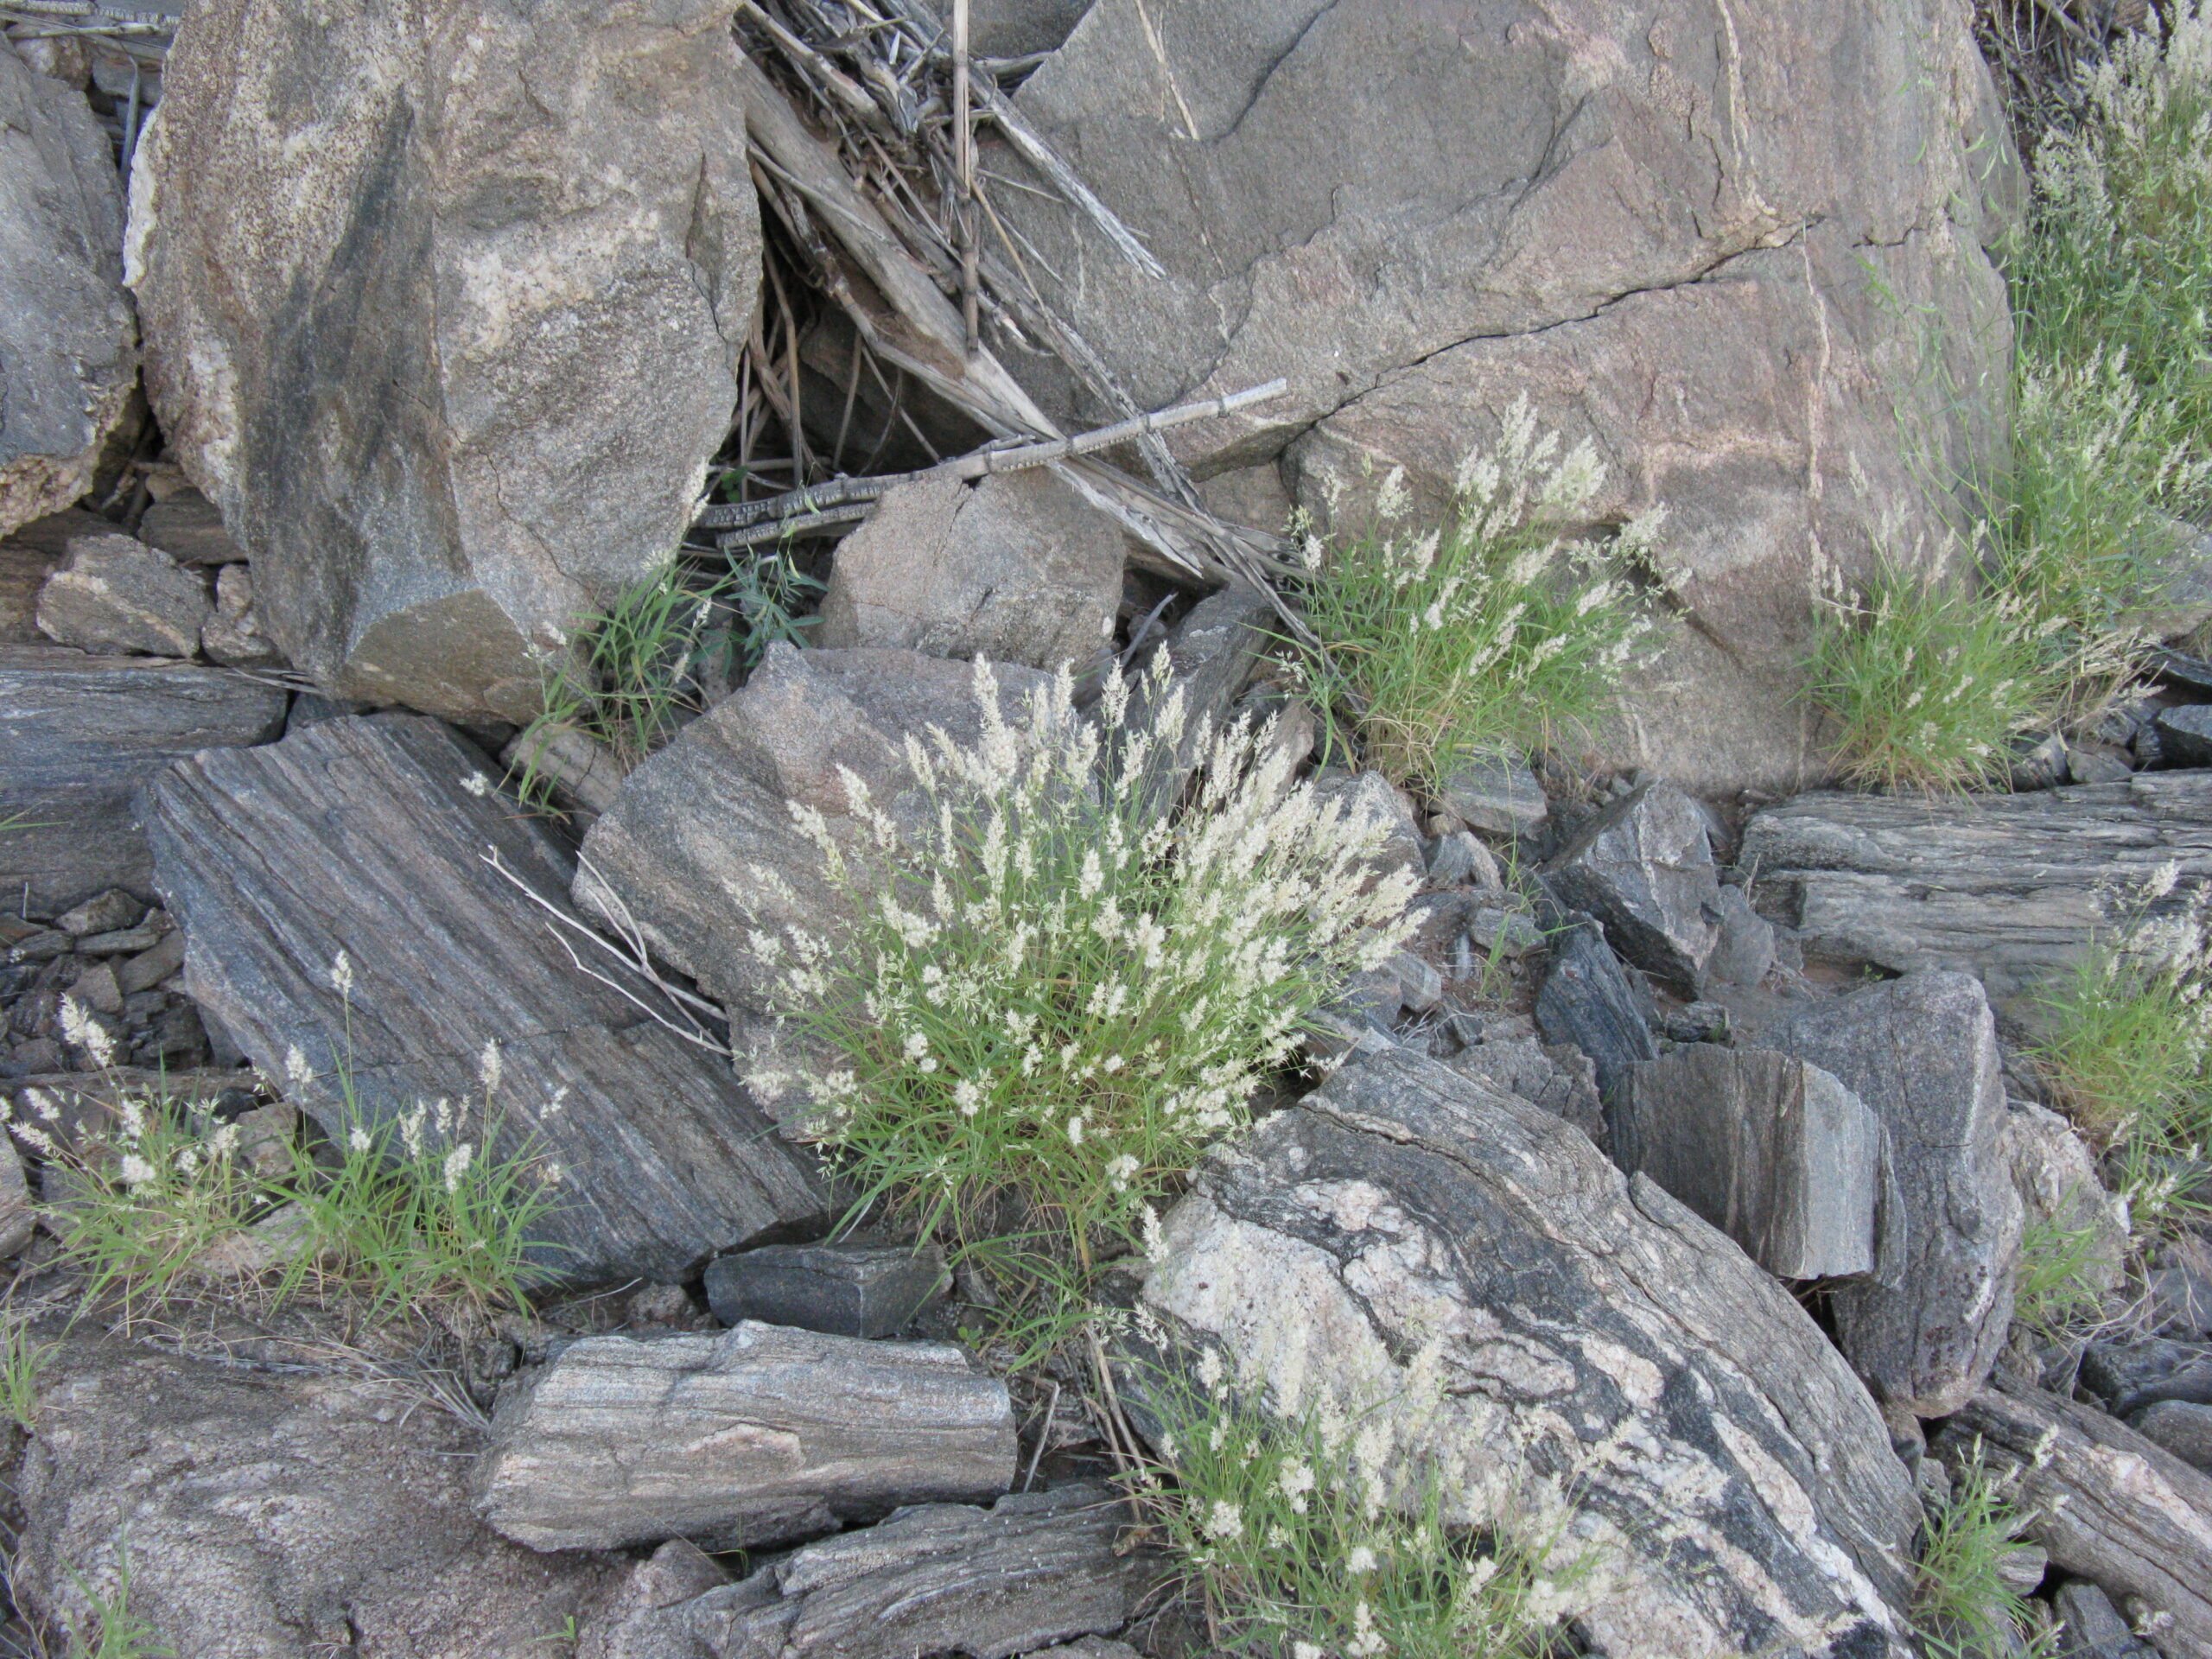 Photograph of bunches of grass growing among gray rocks. The grass is green with white inflorescences.